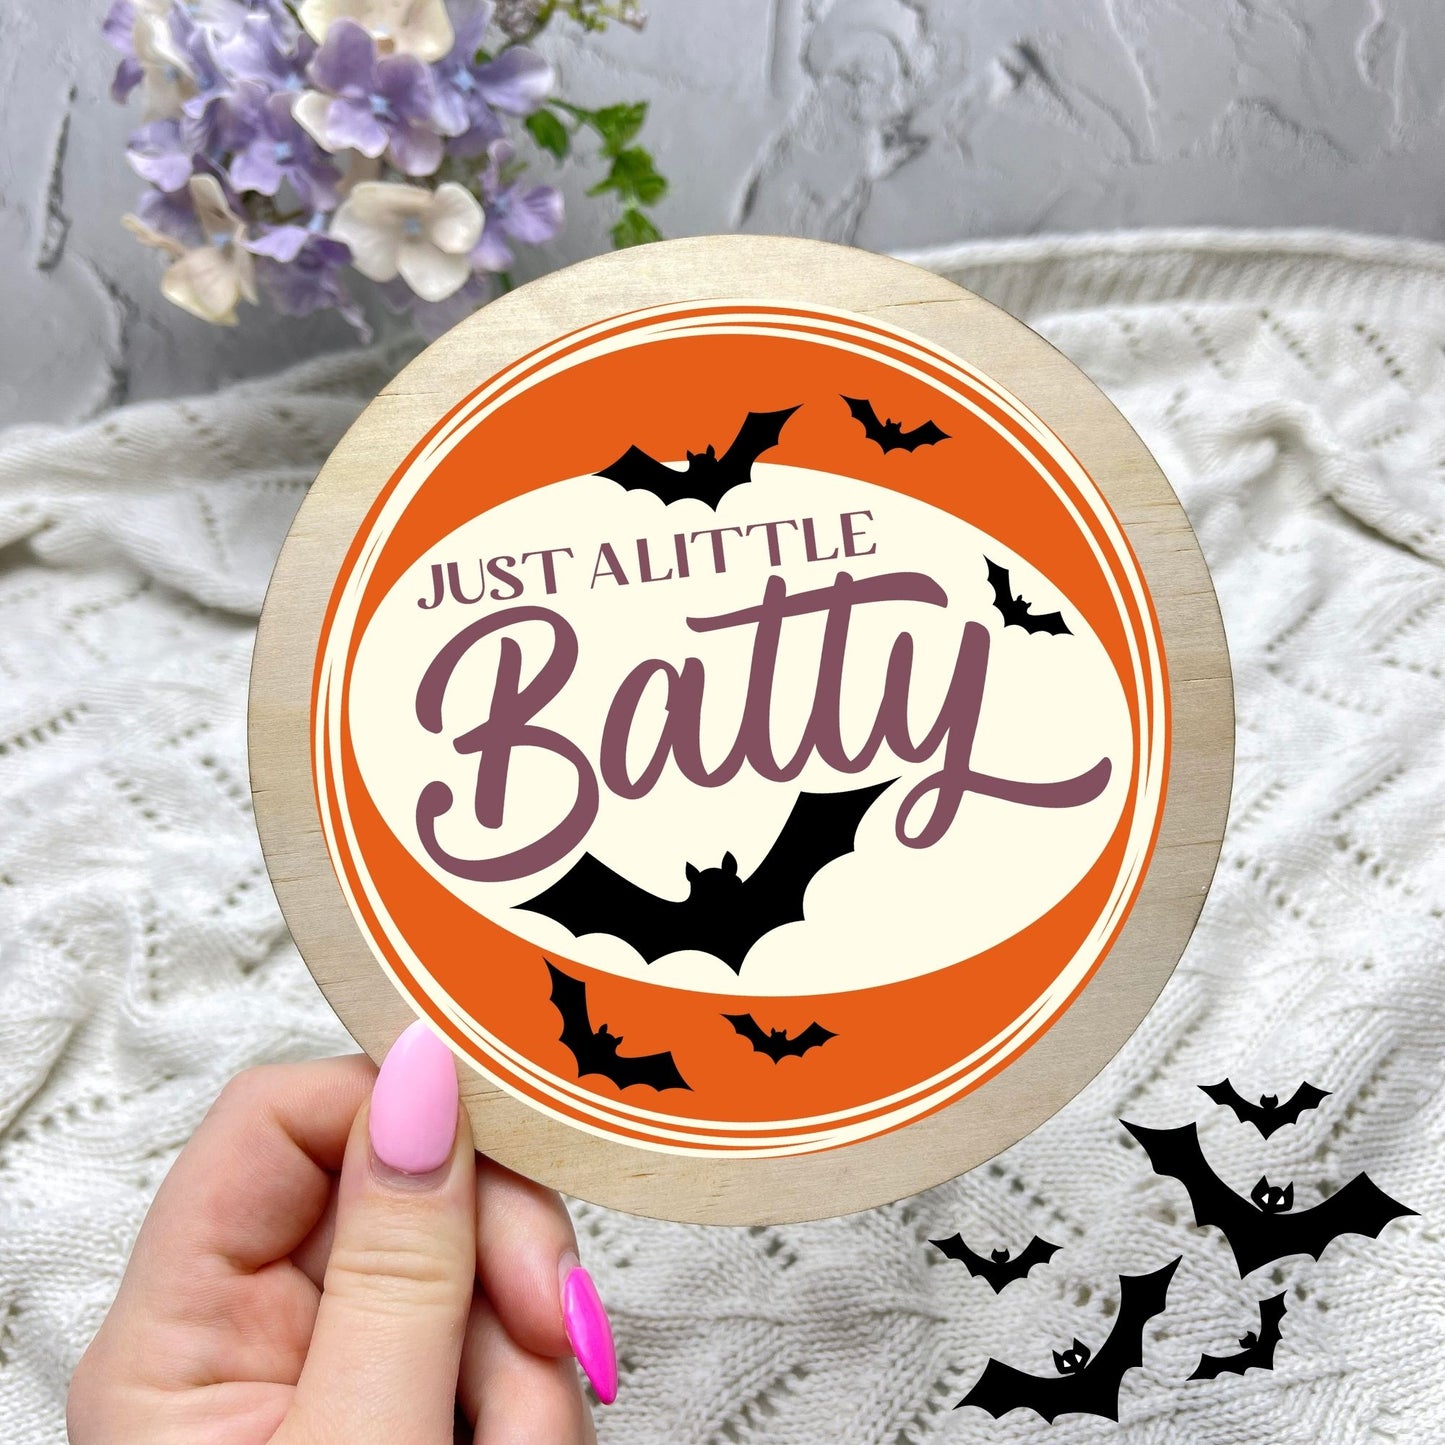 Just a little batty sign, Halloween Decor, Spooky Vibes, hocus pocus sign, trick or treat decor, haunted house h57